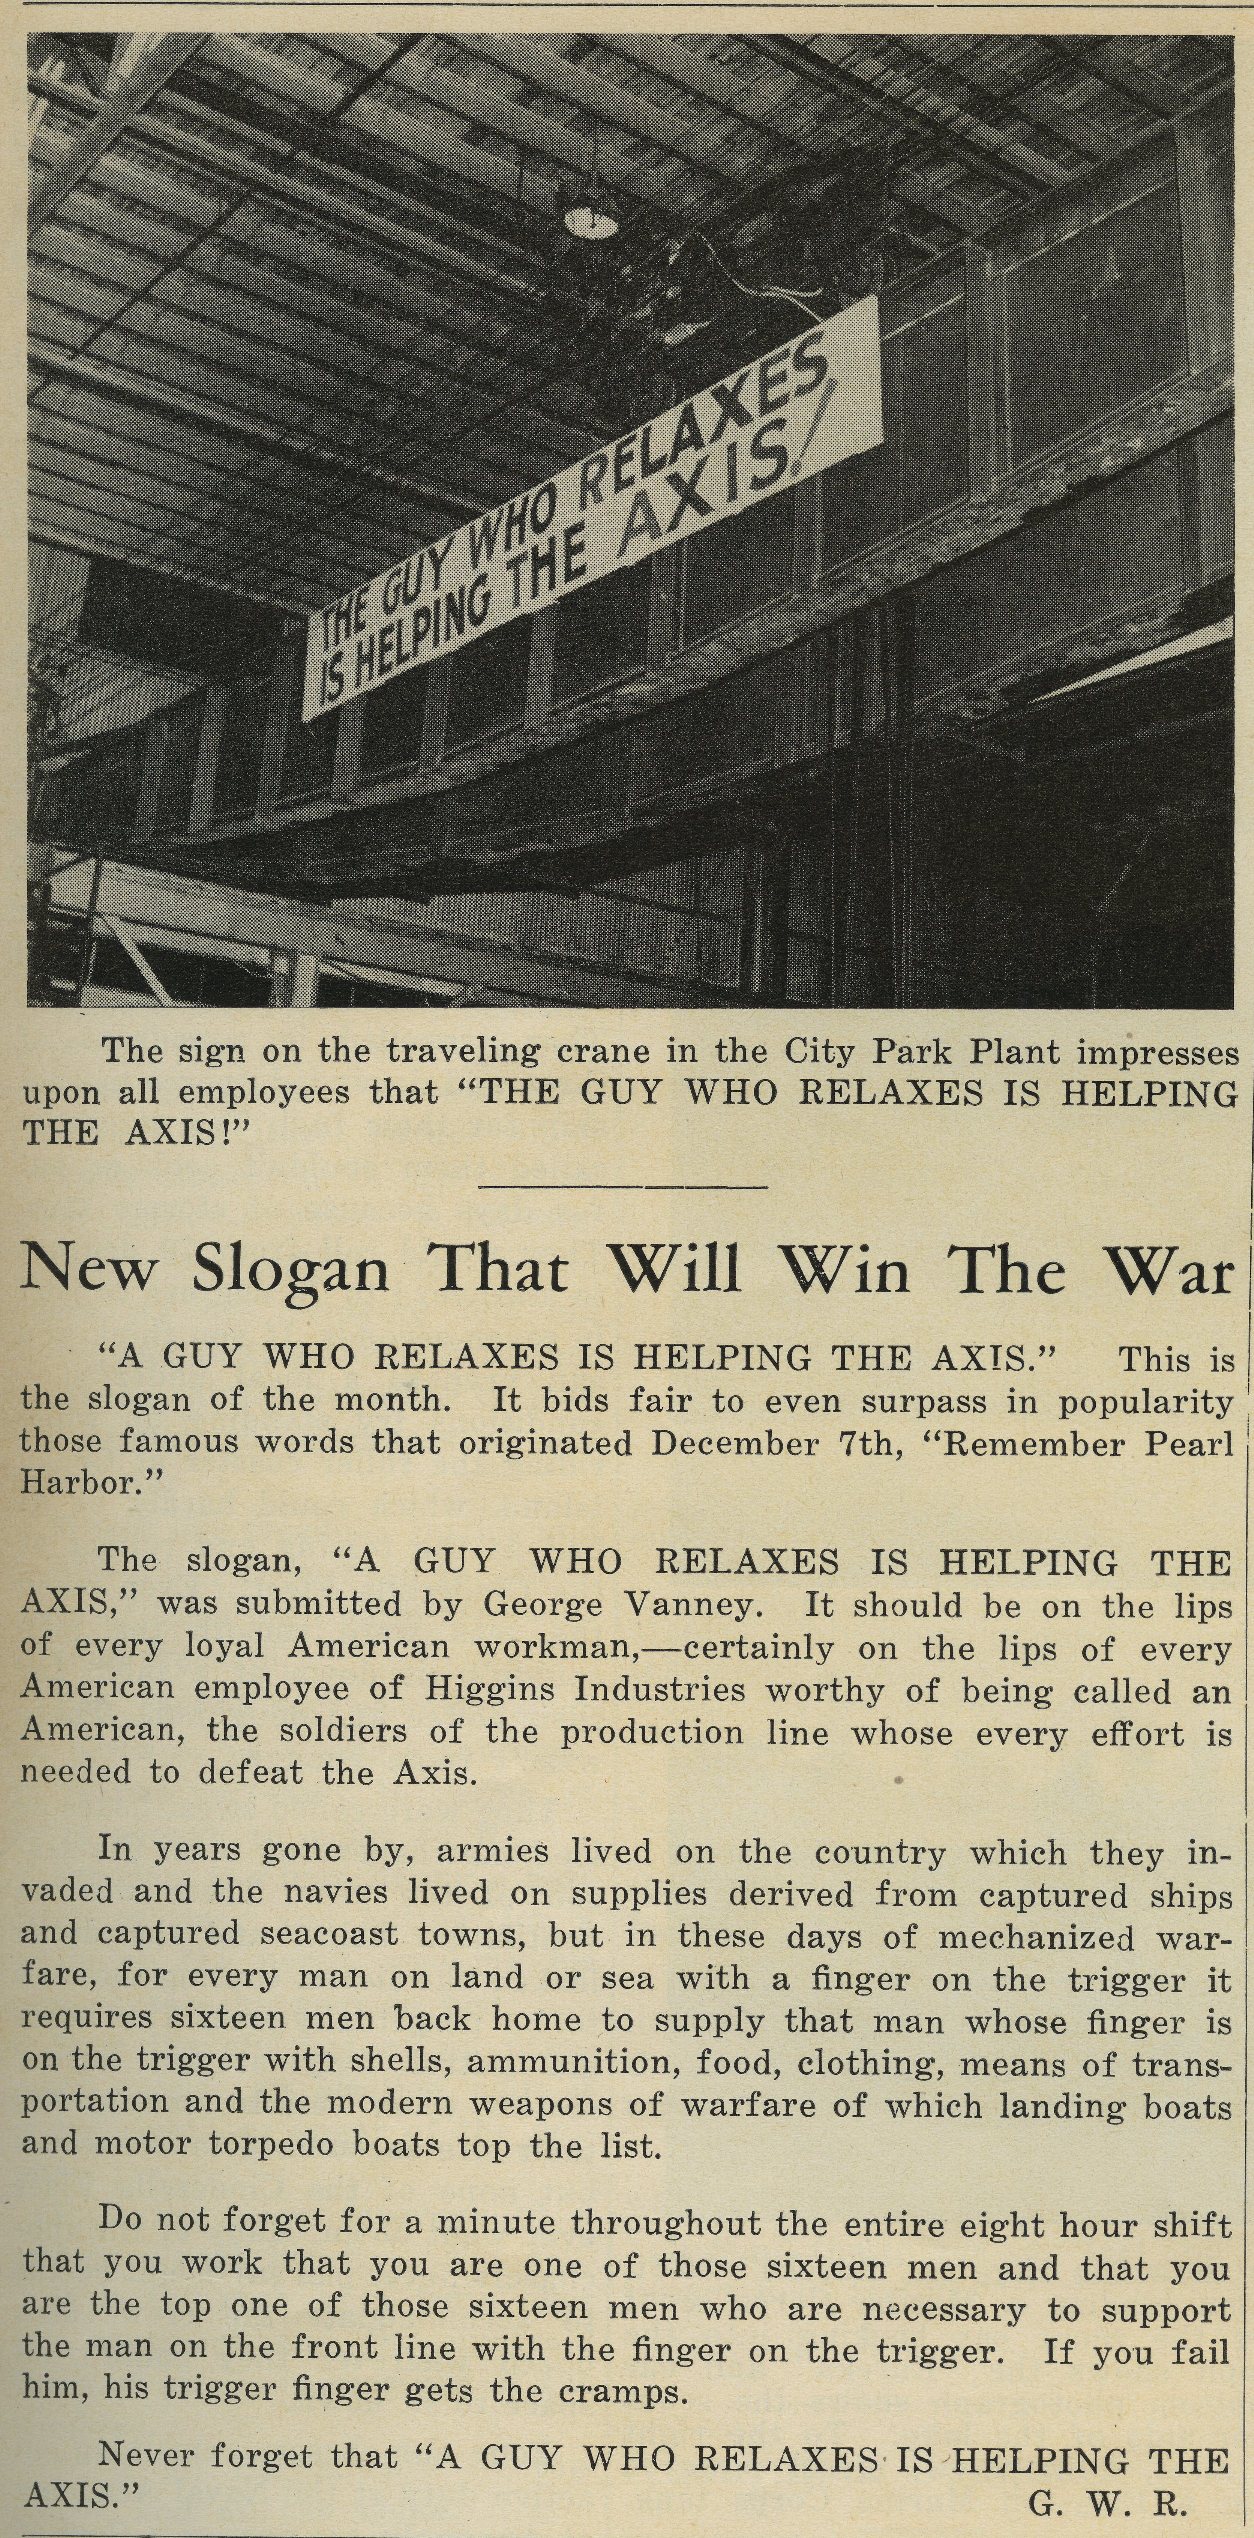 Article from The Eureka News Bulletin. Courtesy of The National WWII Museum